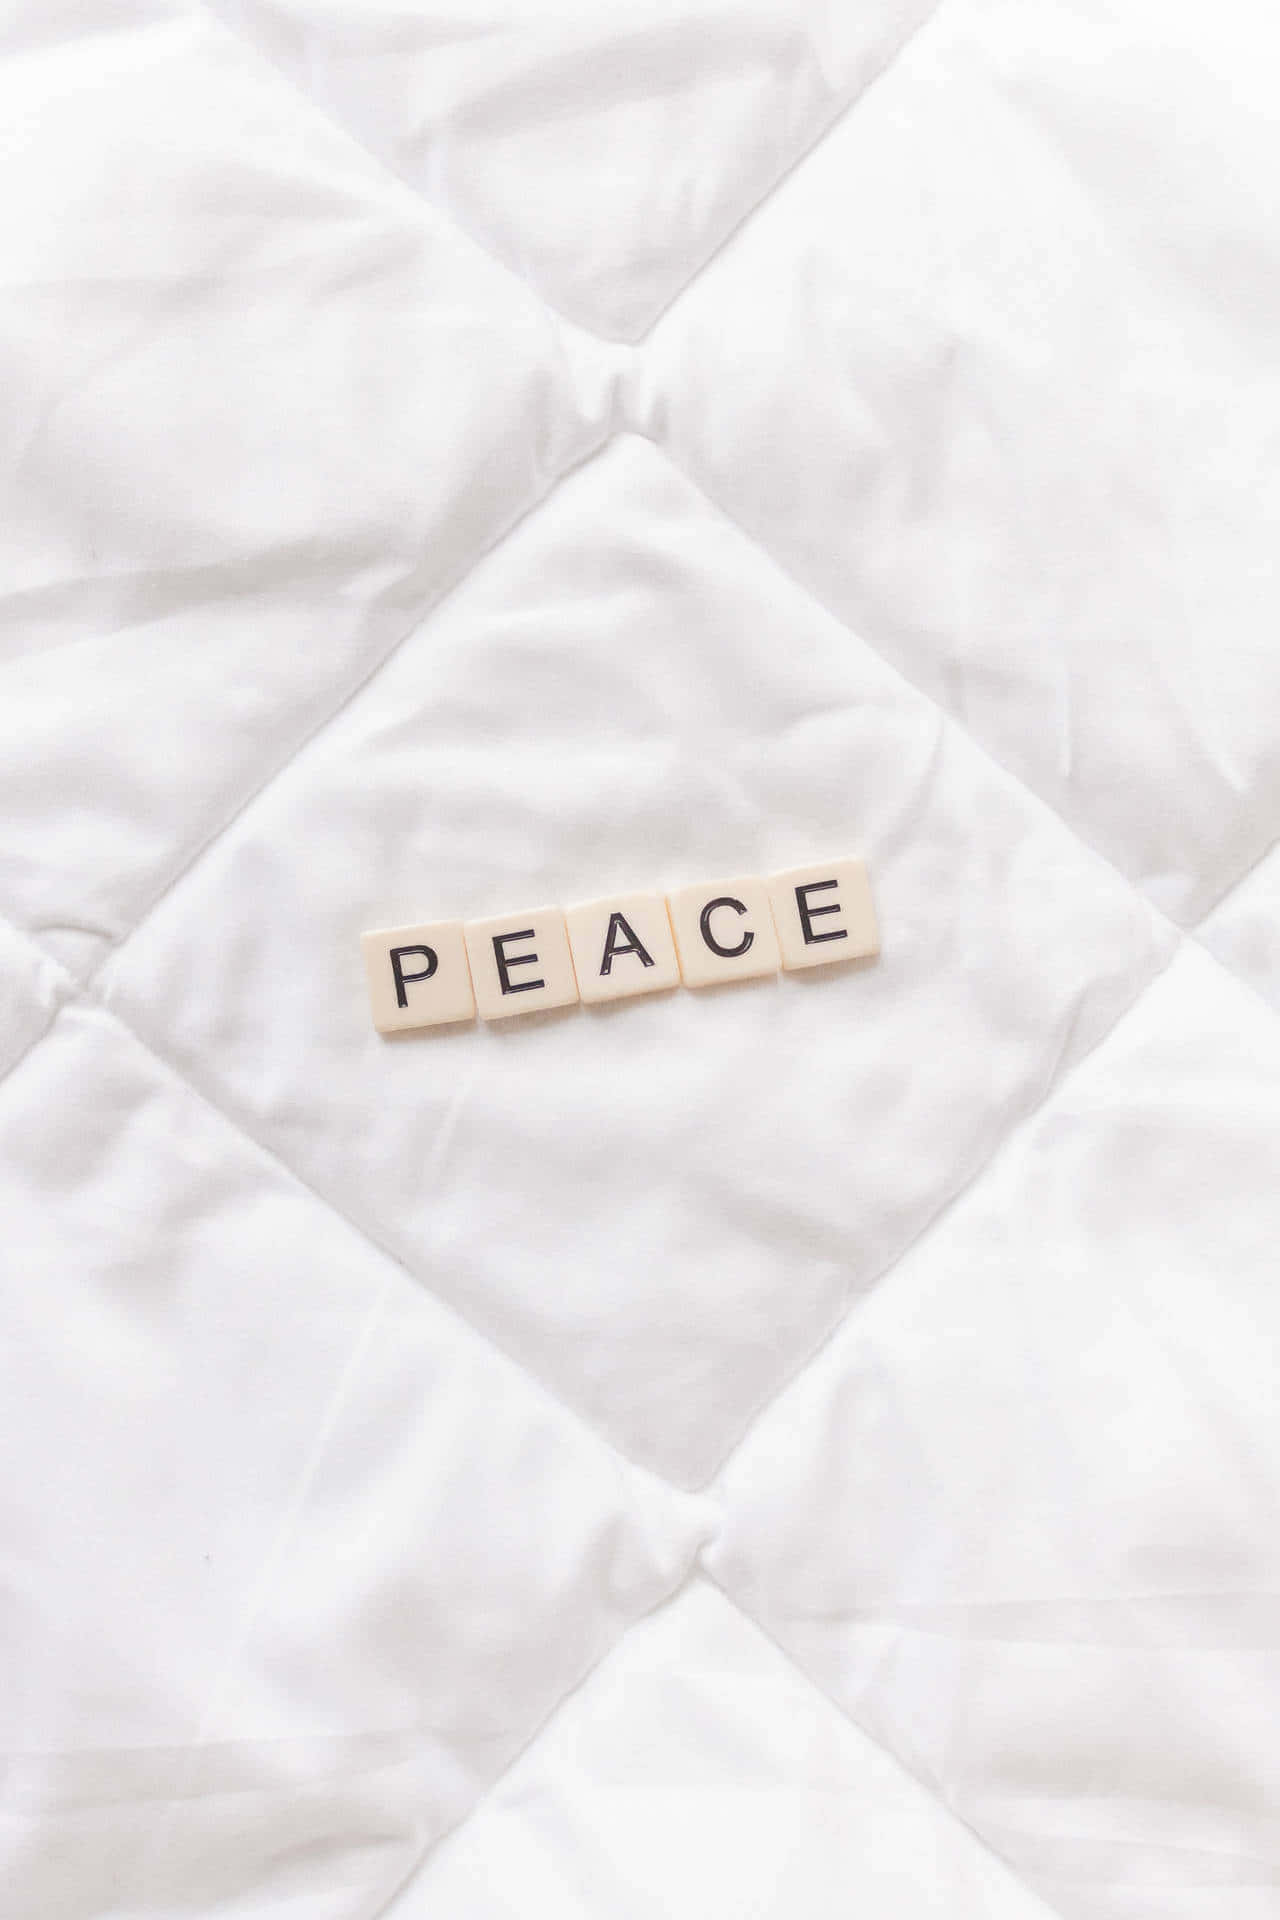 A White Quilt With The Word Peace On It